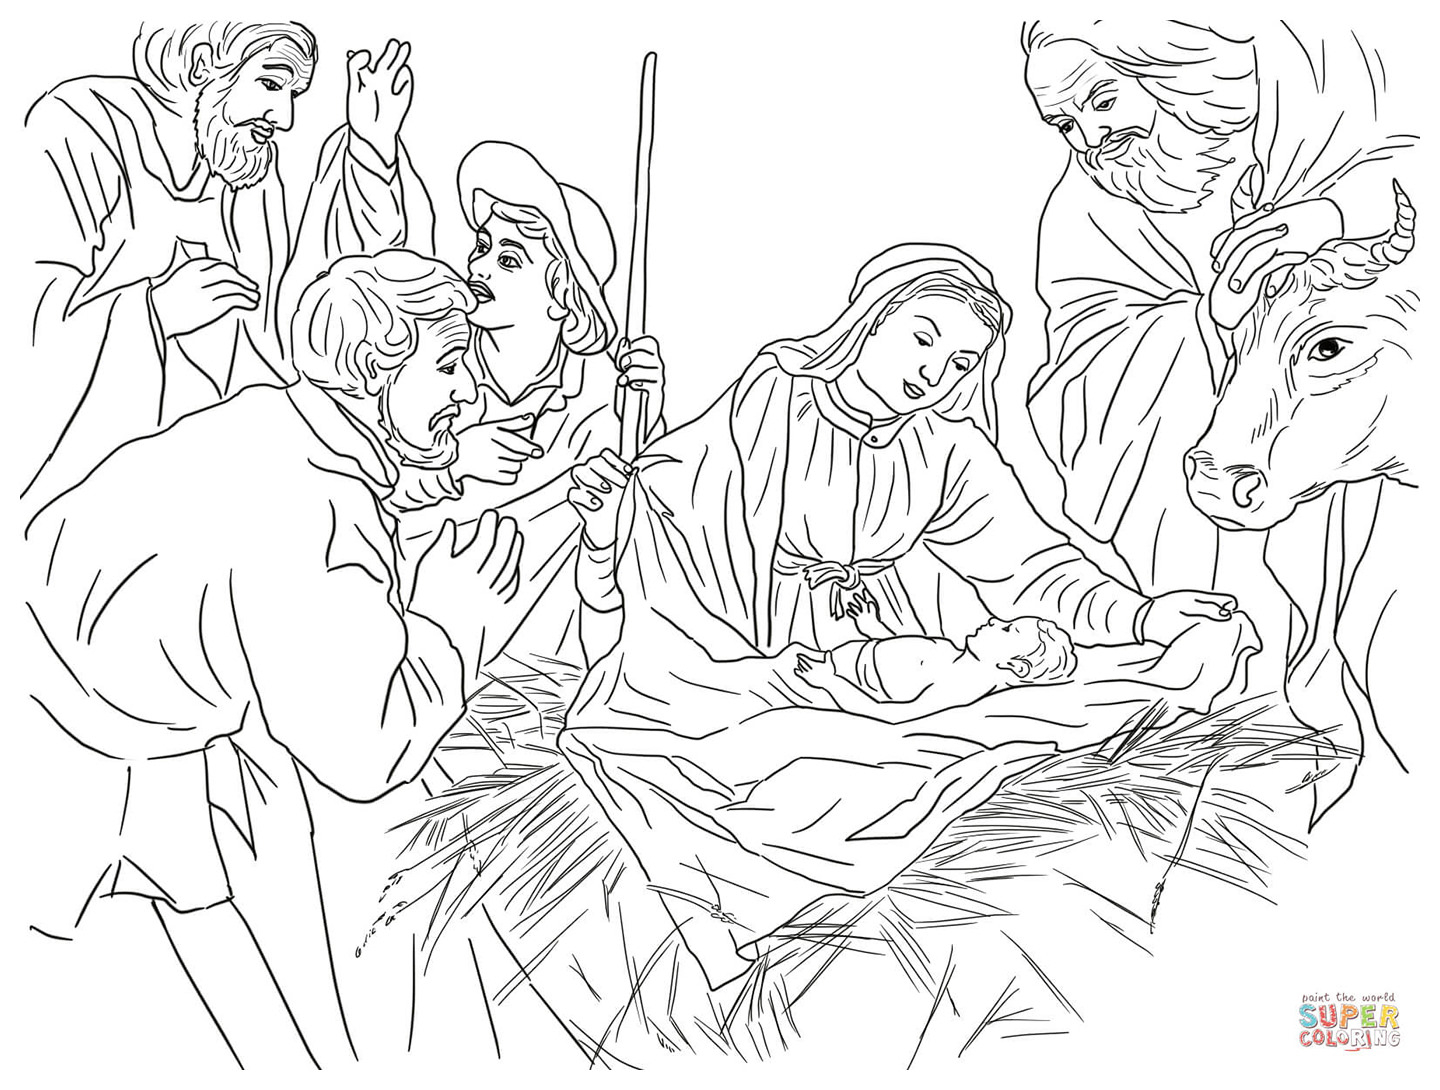 Angel Visits Joseph Coloring Page Free Christian Coloring Pages For Children And Adults Level 3